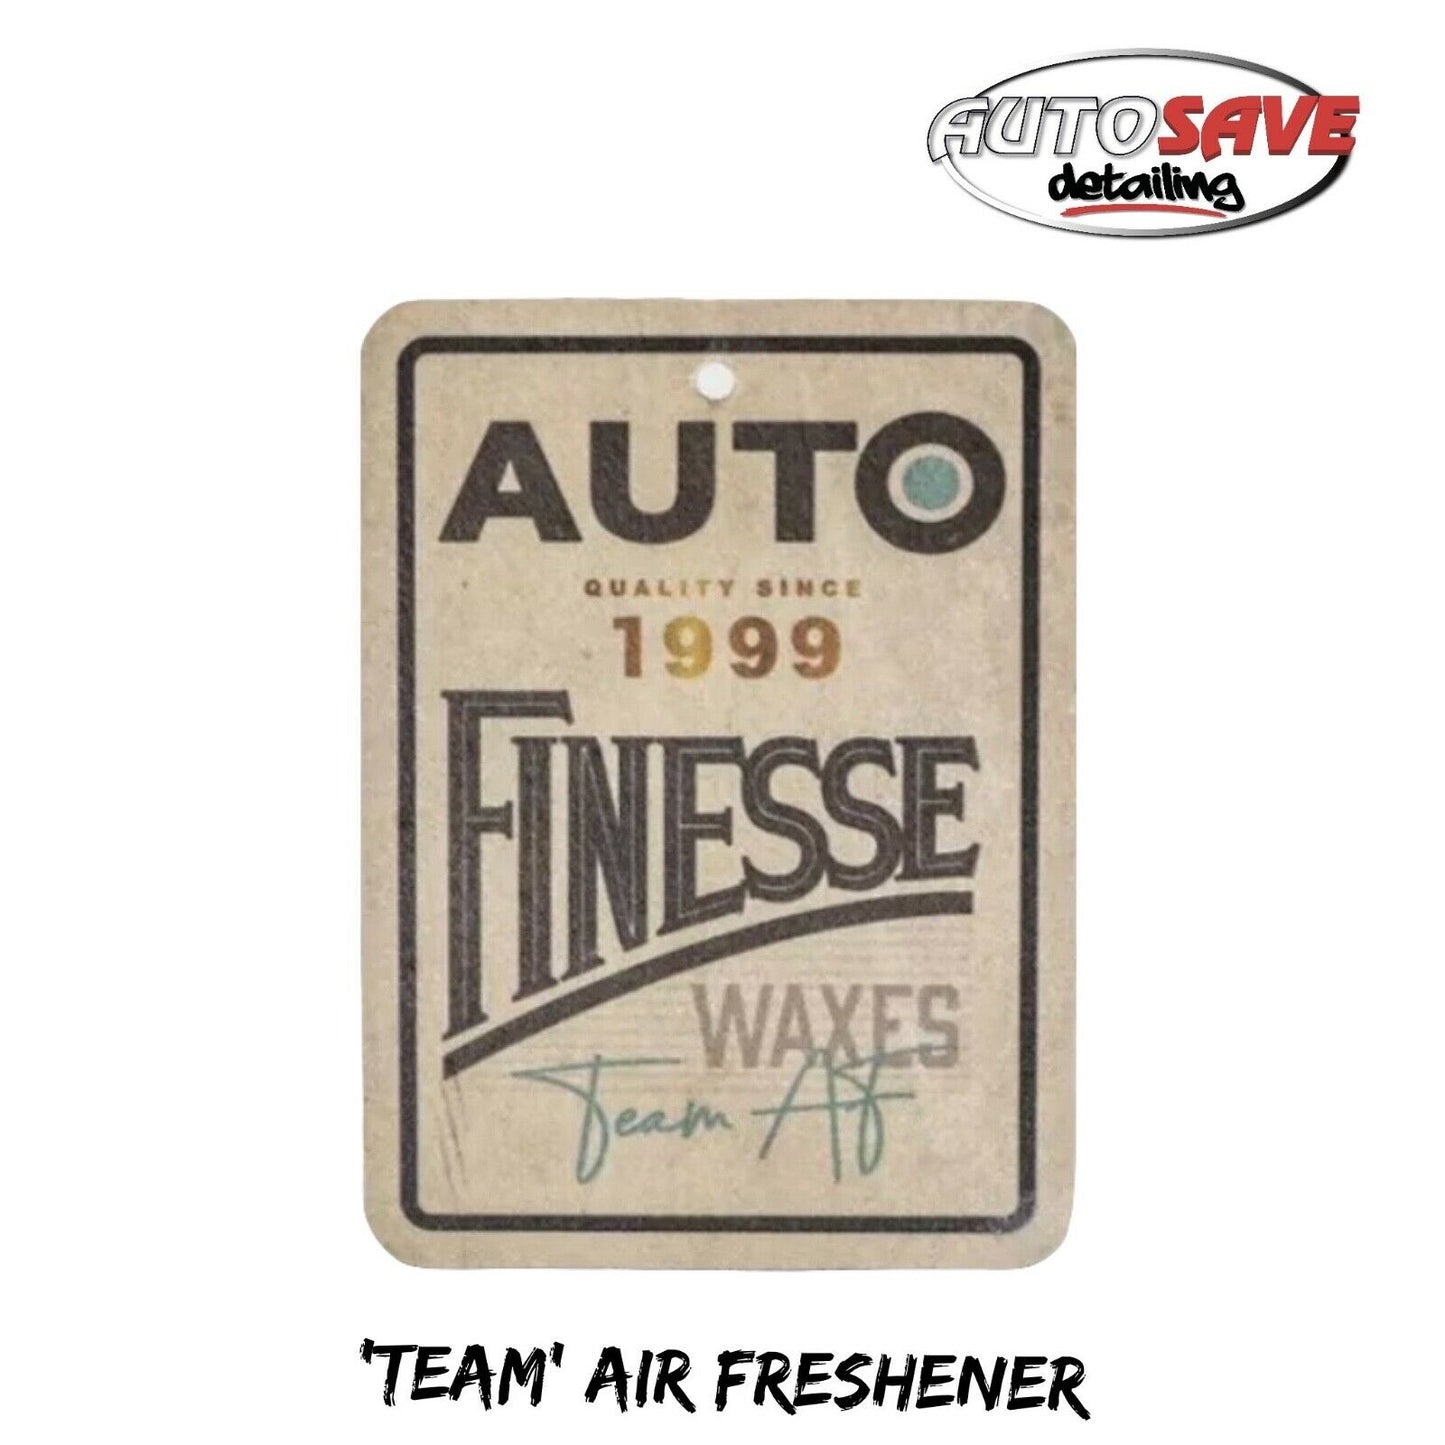 NEW - Limited Edition - Auto Finesse - Retro Air Freshener - Team